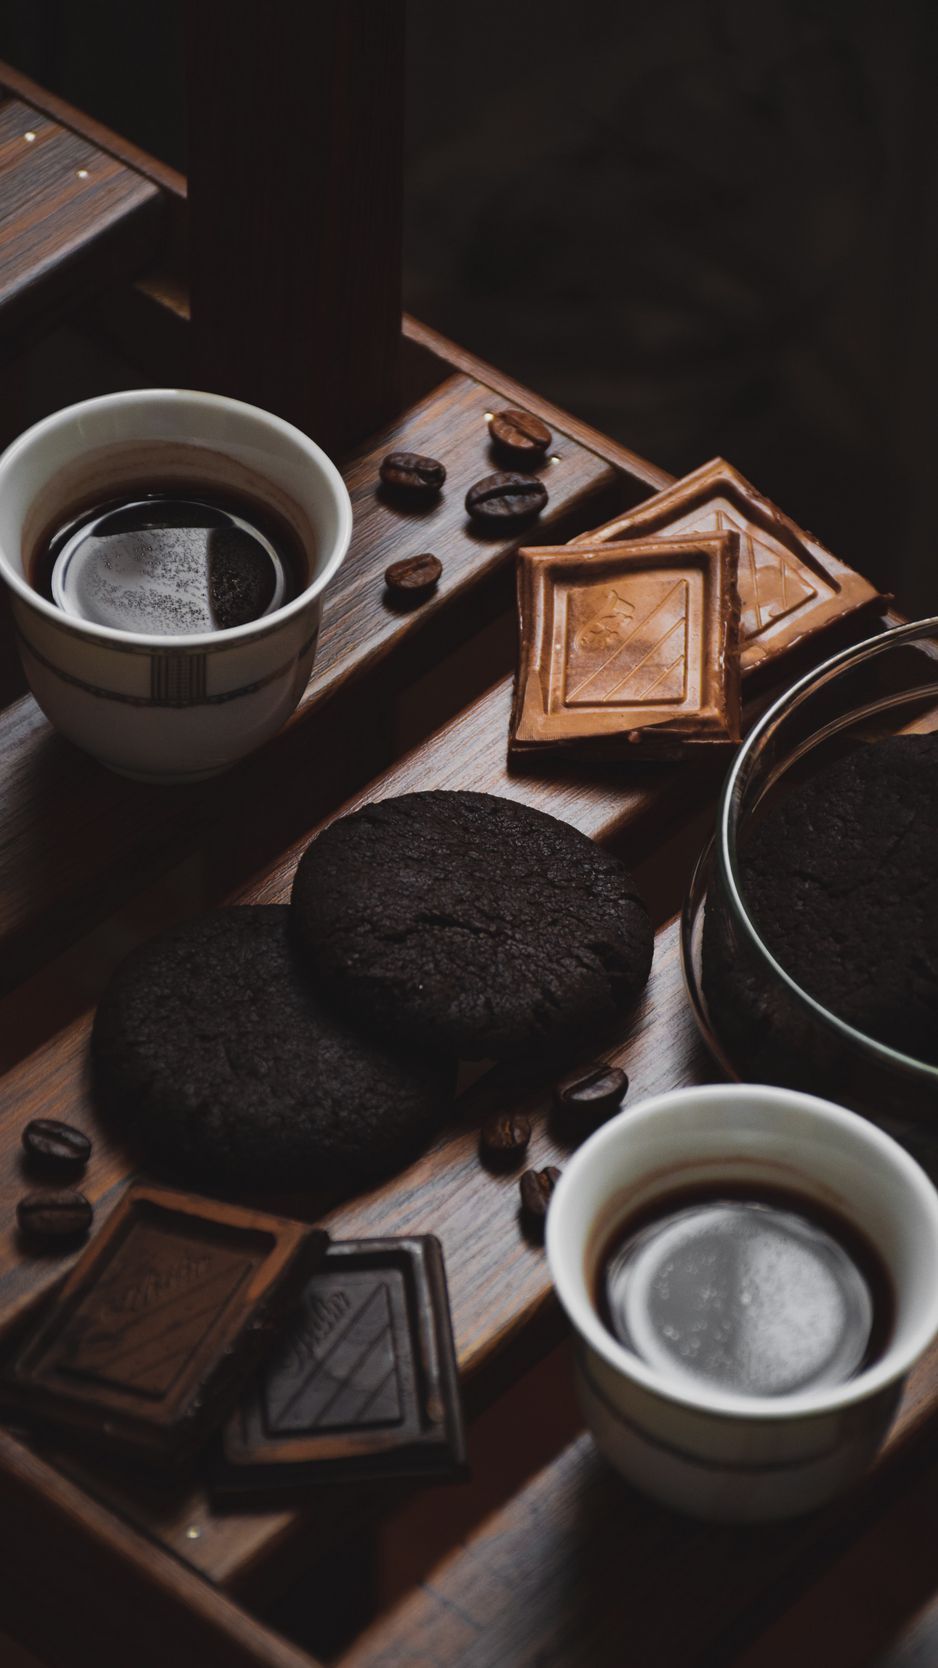 A table with cookies and cups of coffee - Oreo, chocolate